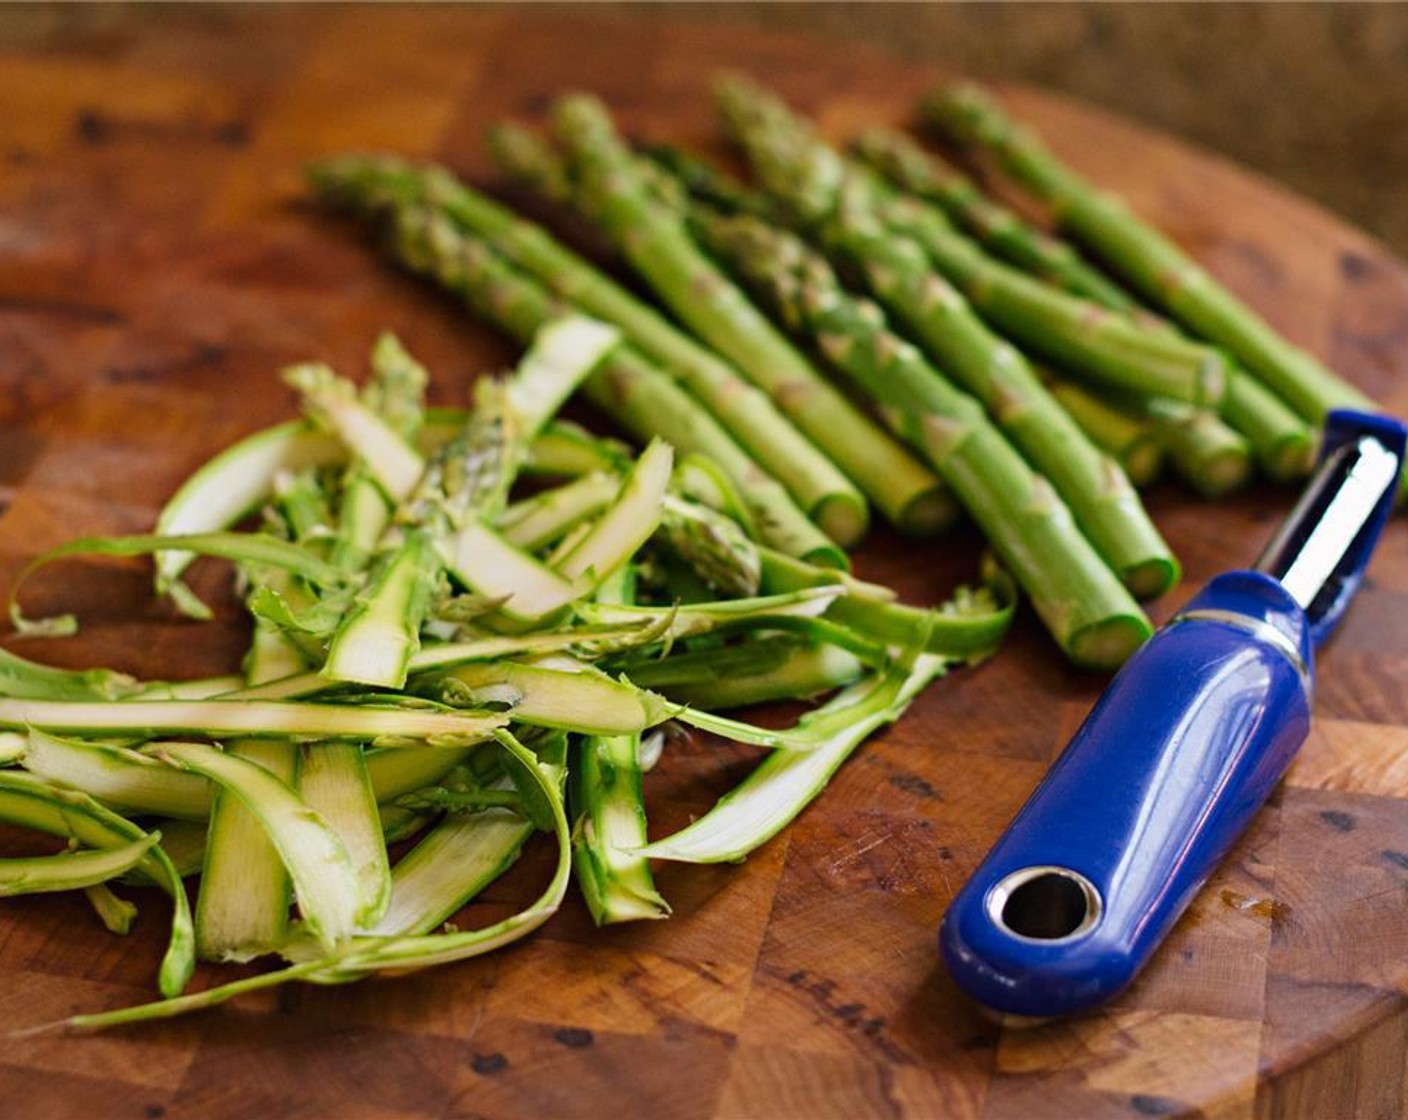 step 4 Clean and trim the Asparagus (1 2/3 cups) by removing the tough lower ends. Use a vegetable peeler to shave the asparagus into ribbons.